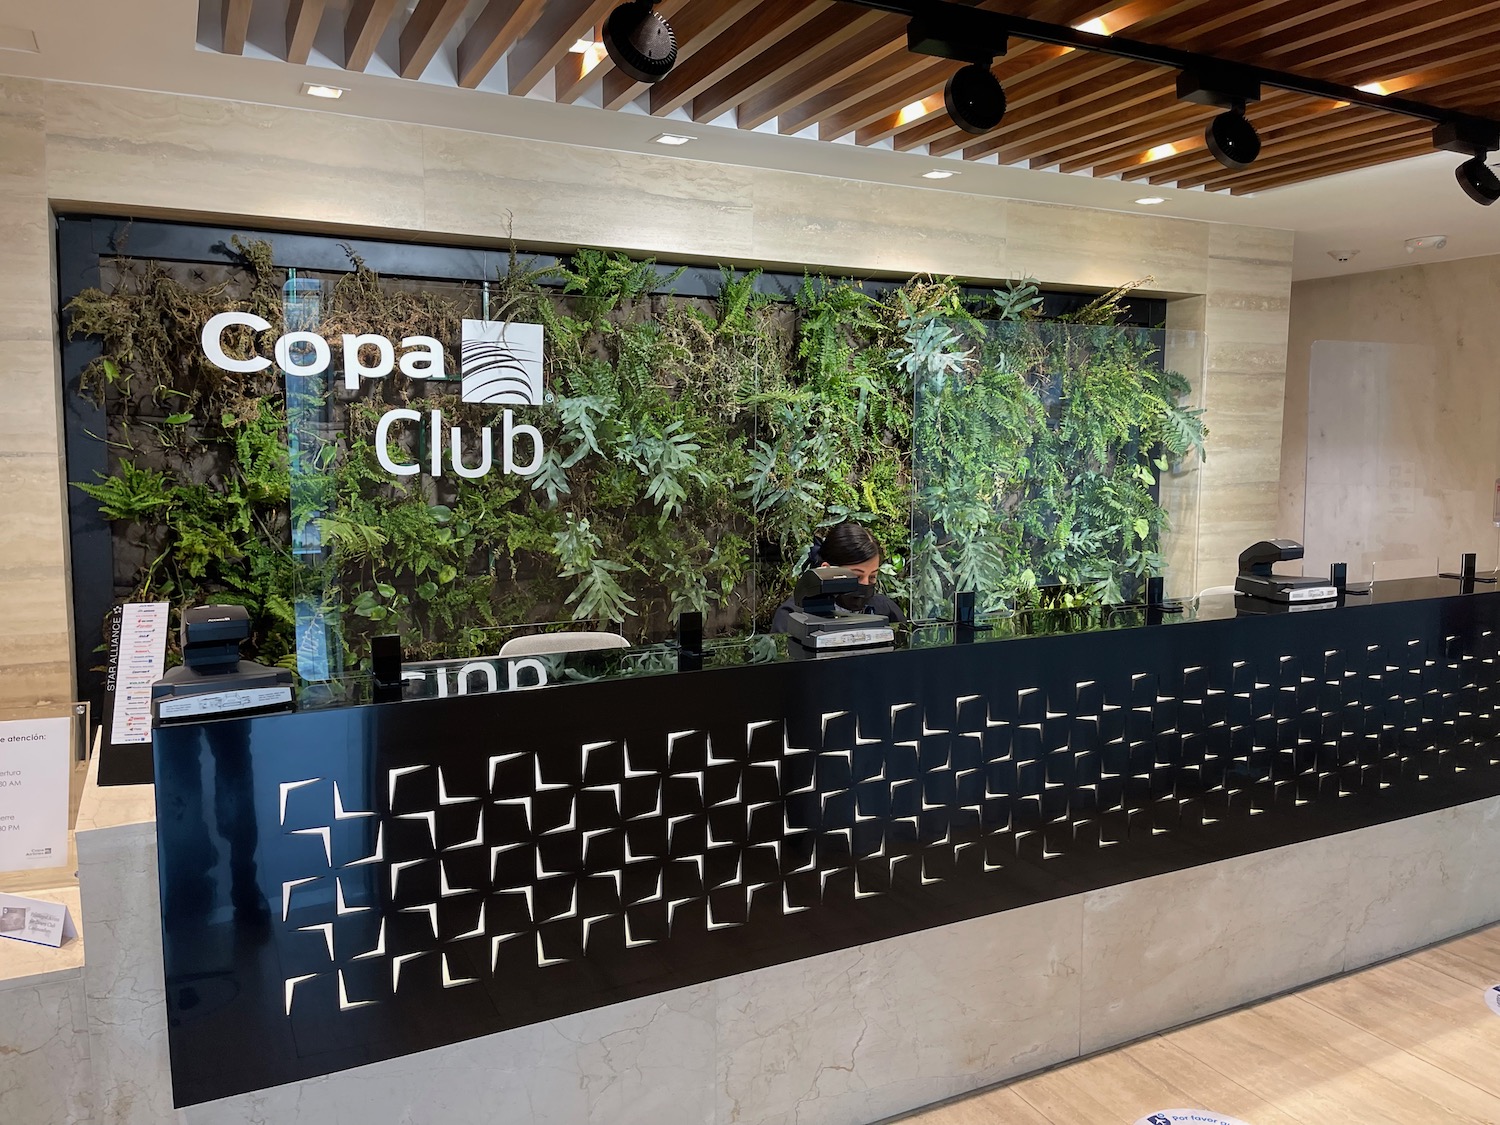 Review: Copa Club Bogota (BOG) - Live and Let's Fly